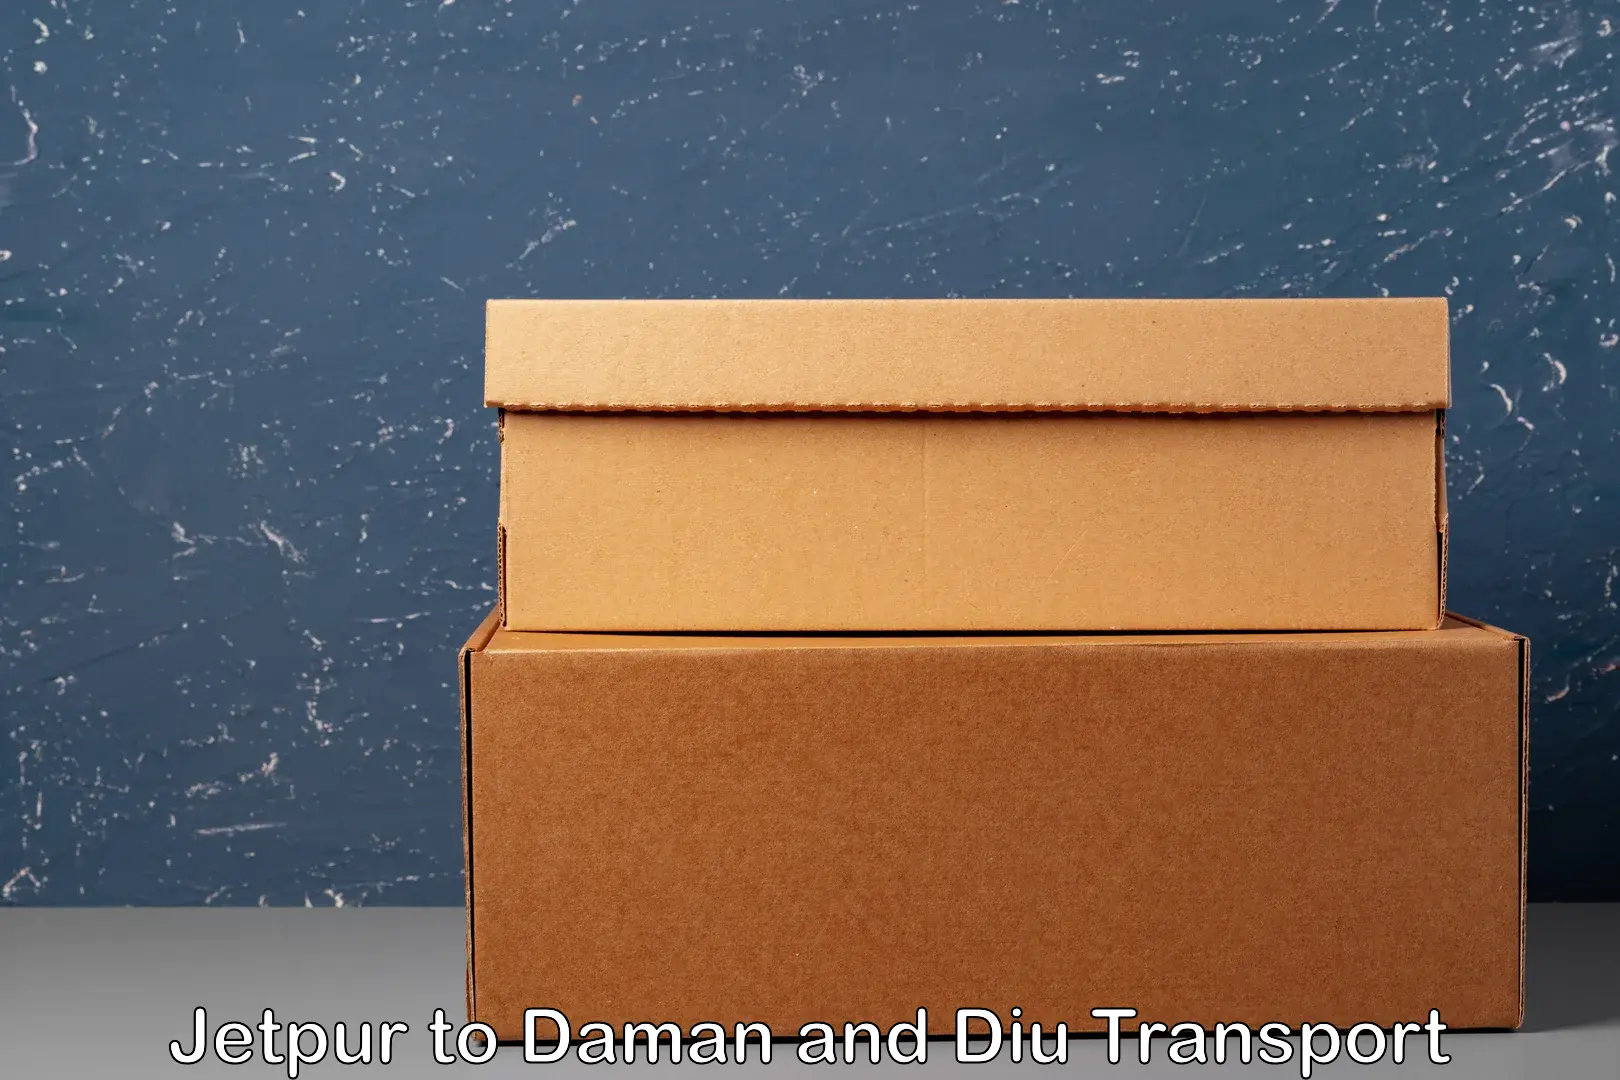 Nationwide transport services Jetpur to Daman and Diu